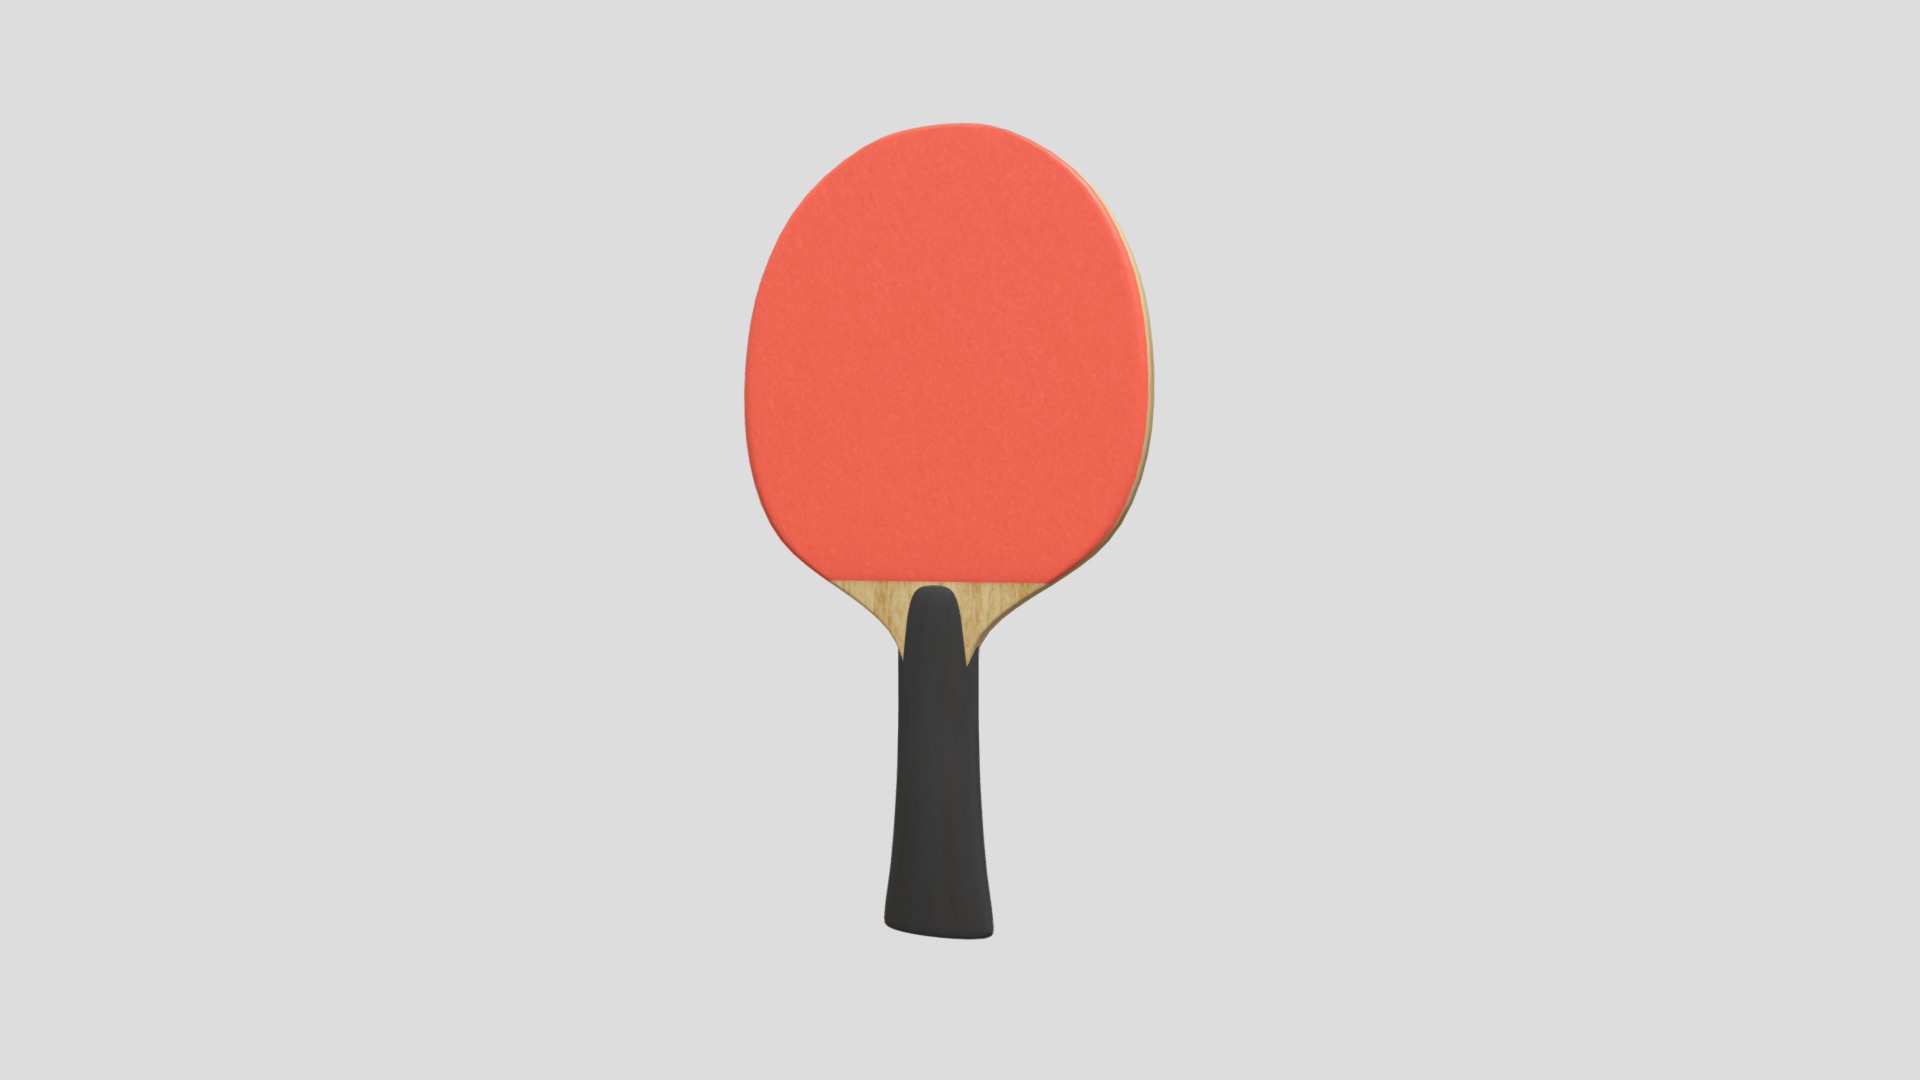 3D model Table Tennis Bat - This is a 3D model of the Table Tennis Bat. The 3D model is about a red and yellow balloon.